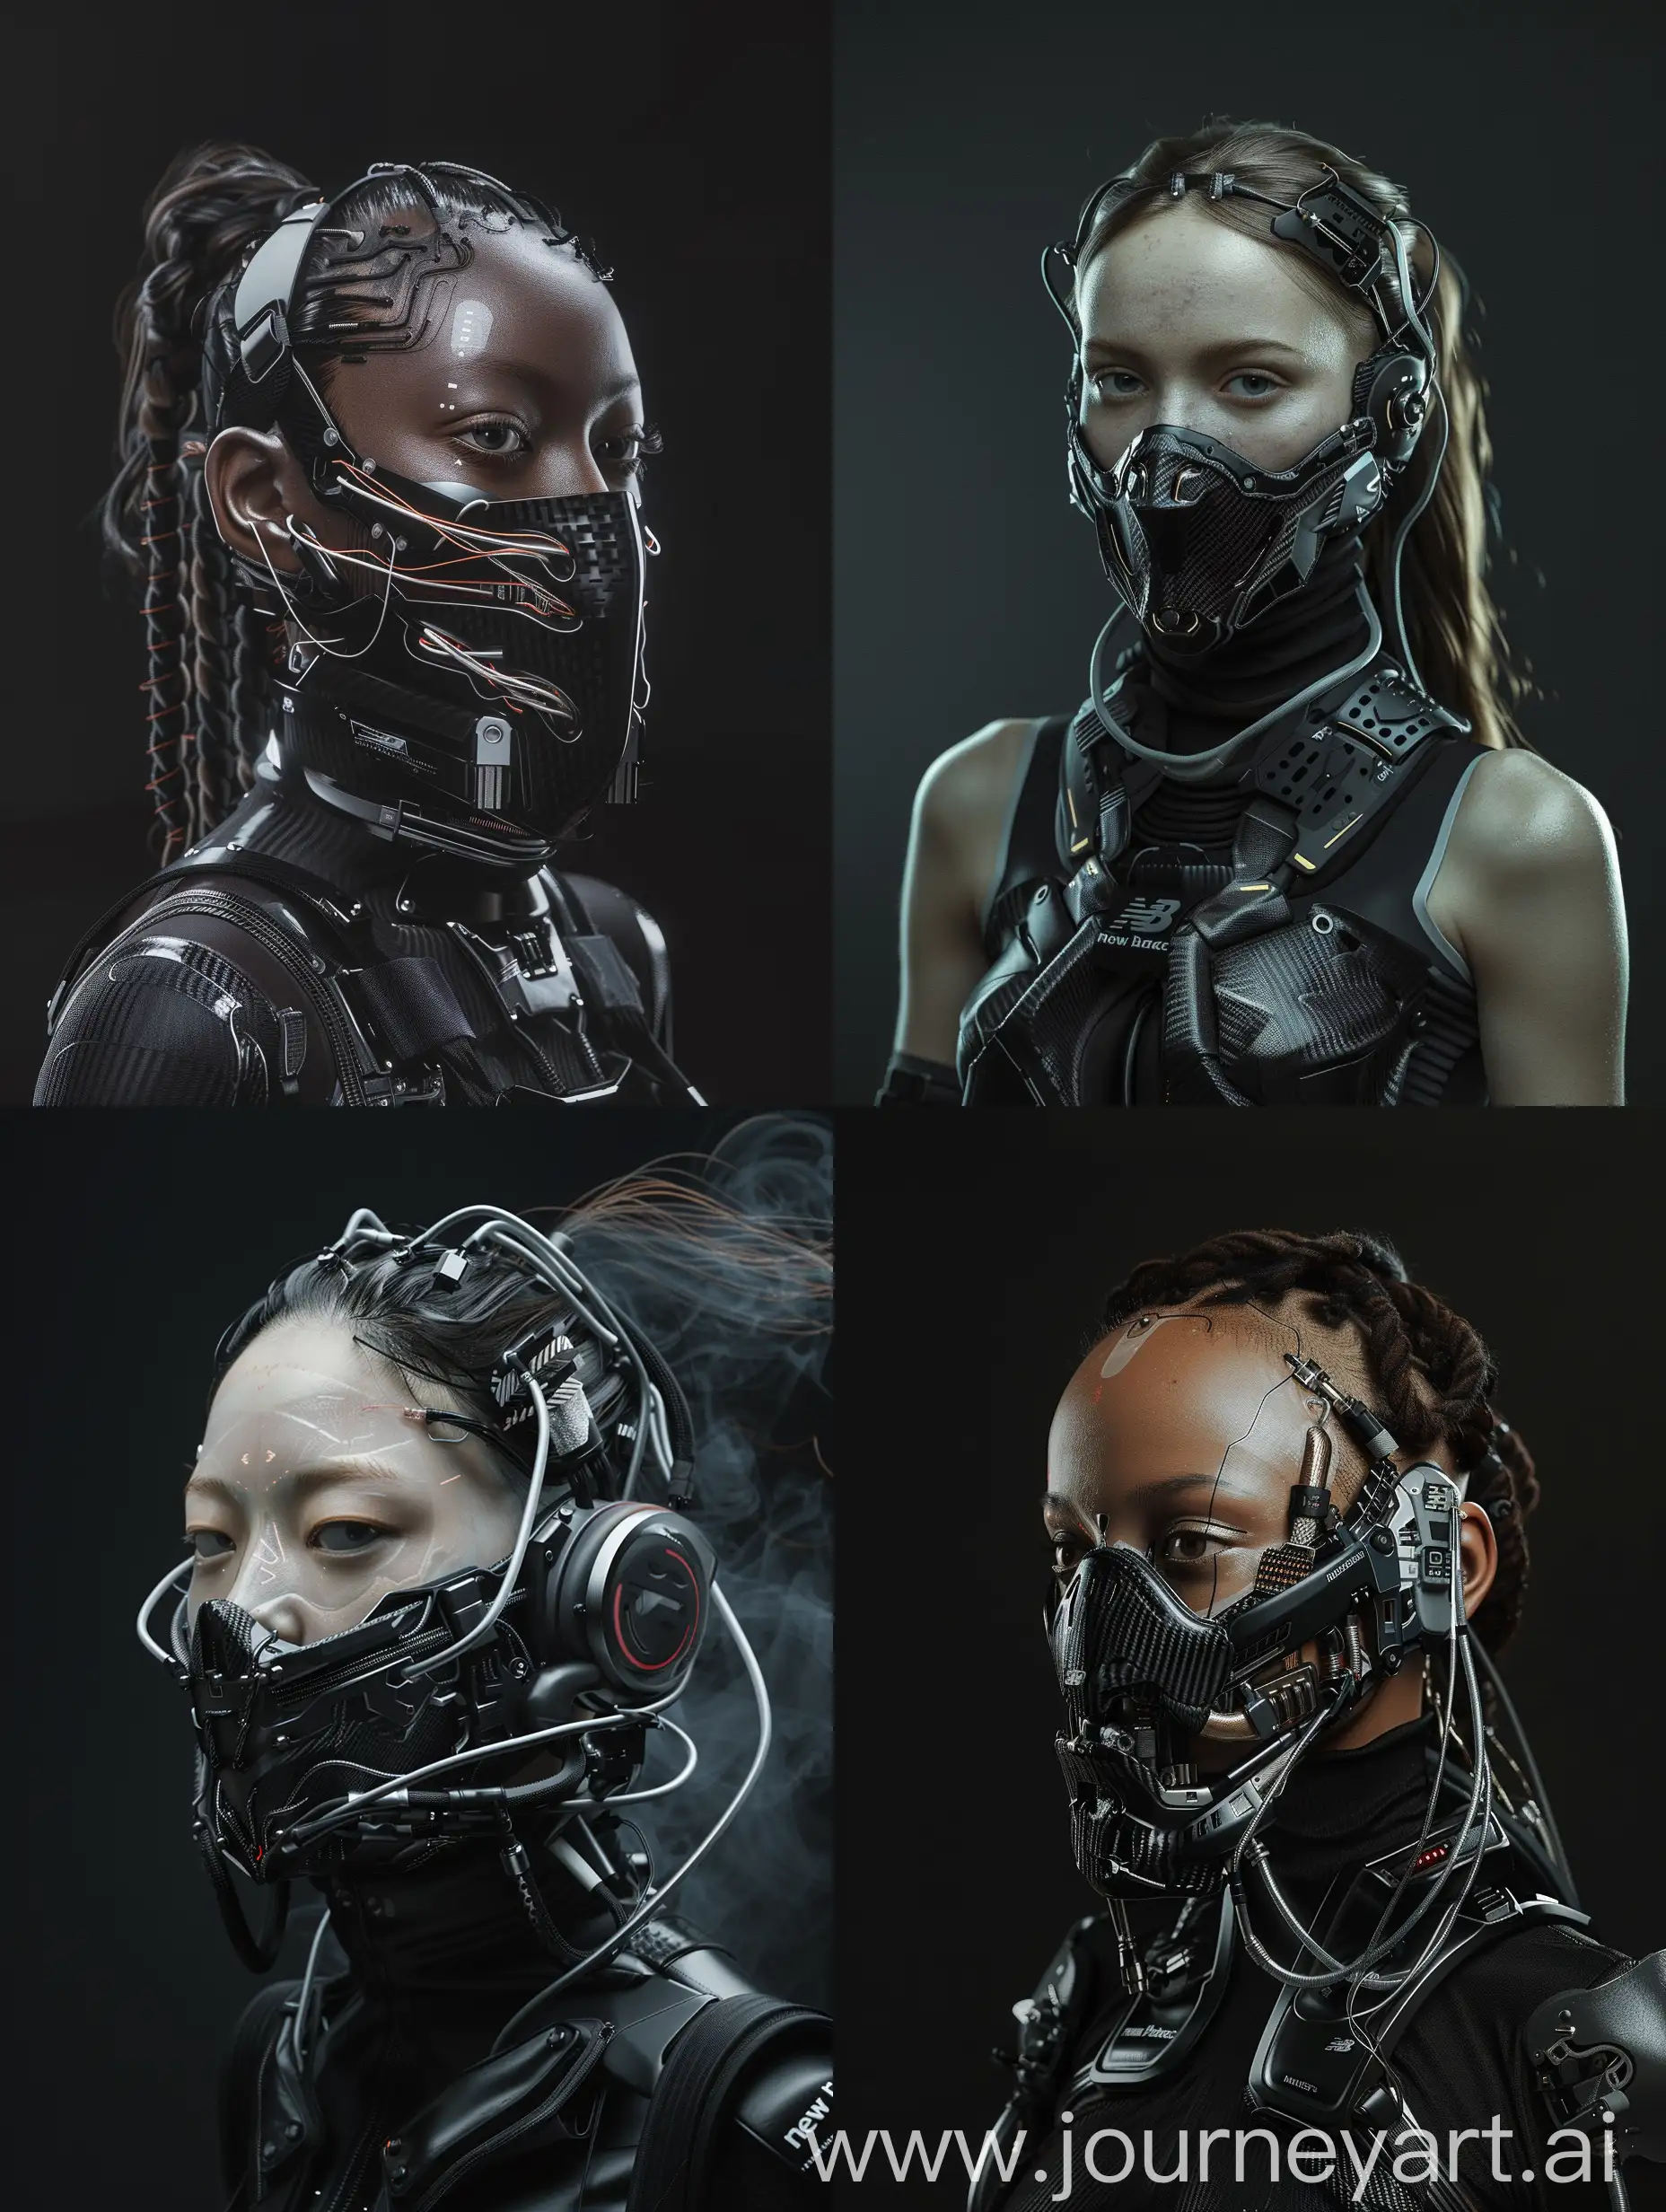 Futuristic-Cyberpunk-Woman-with-Carbon-Fiber-Mask-in-Dynamic-Action